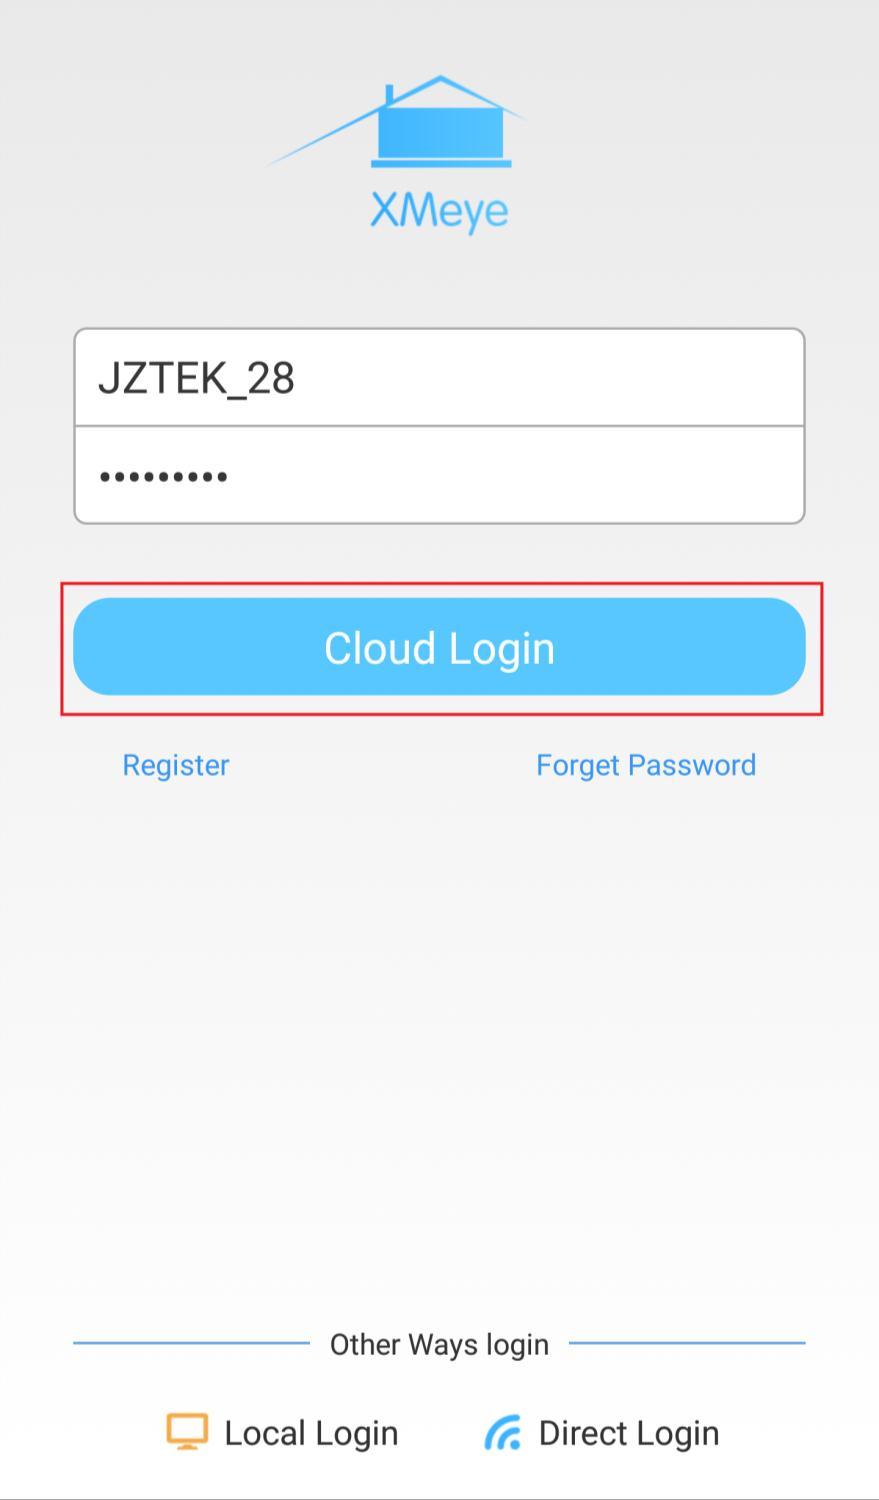 Now you can login APP with the username and password you just